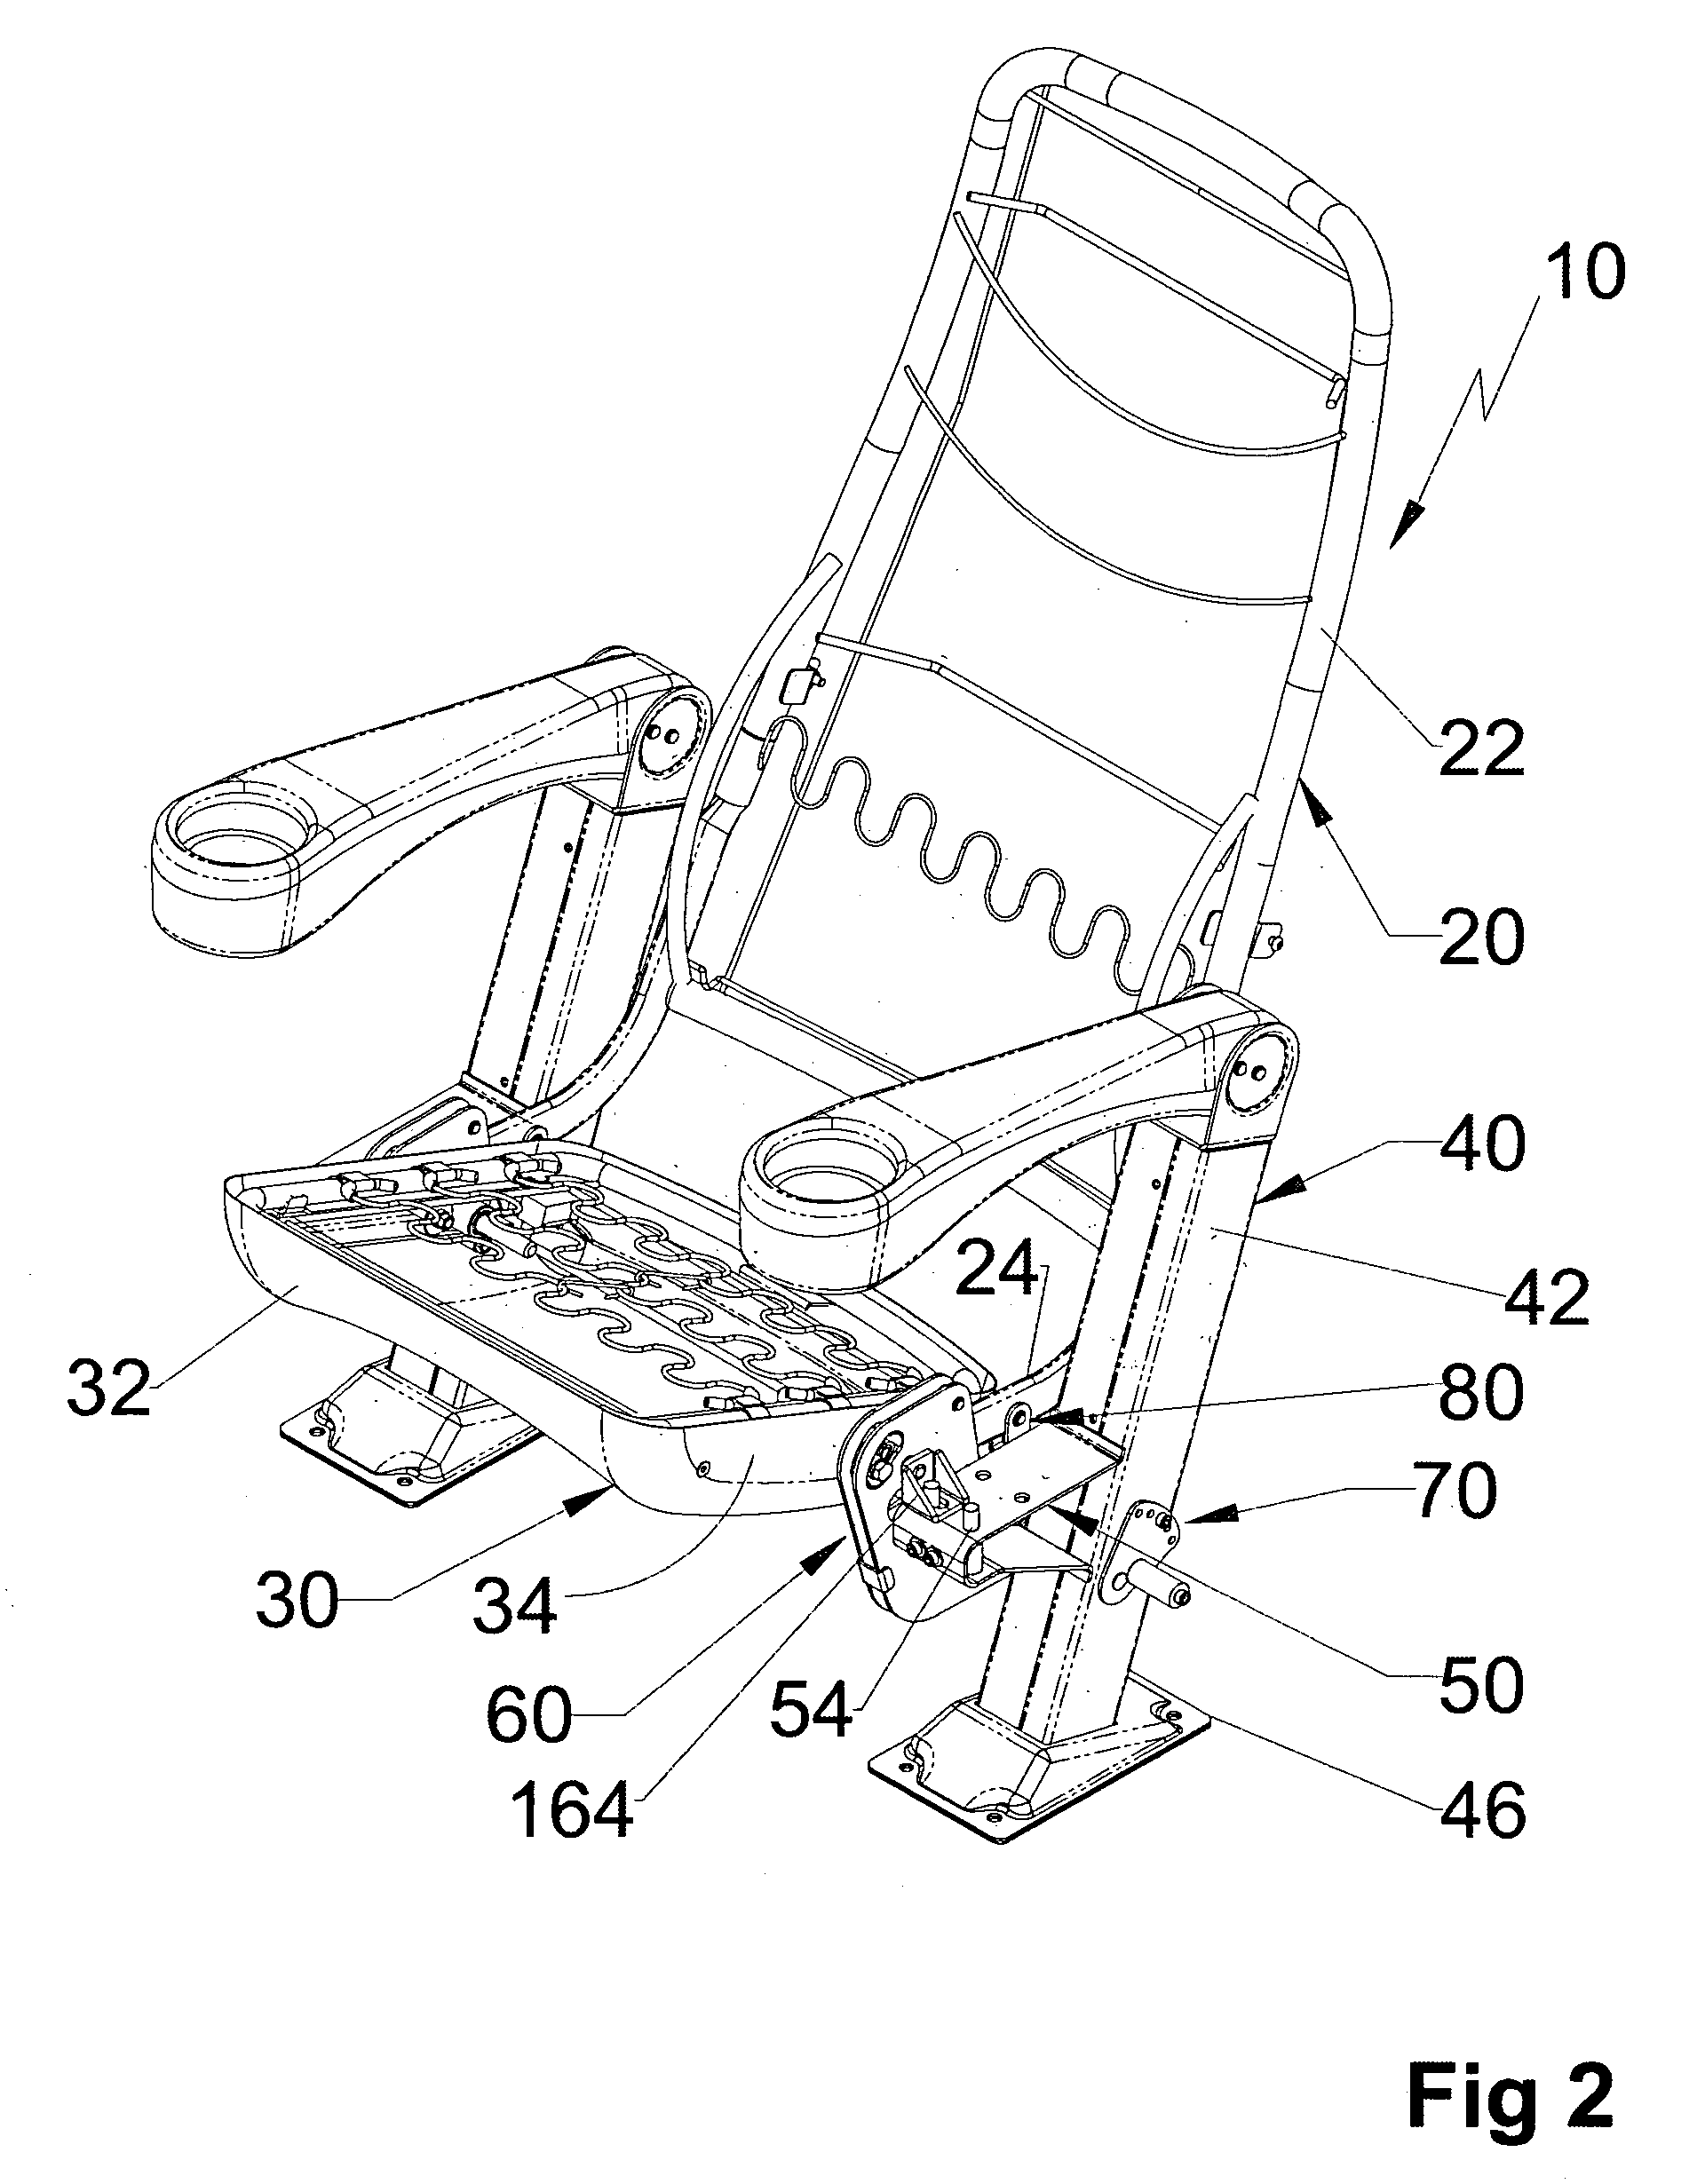 Reclining chair system